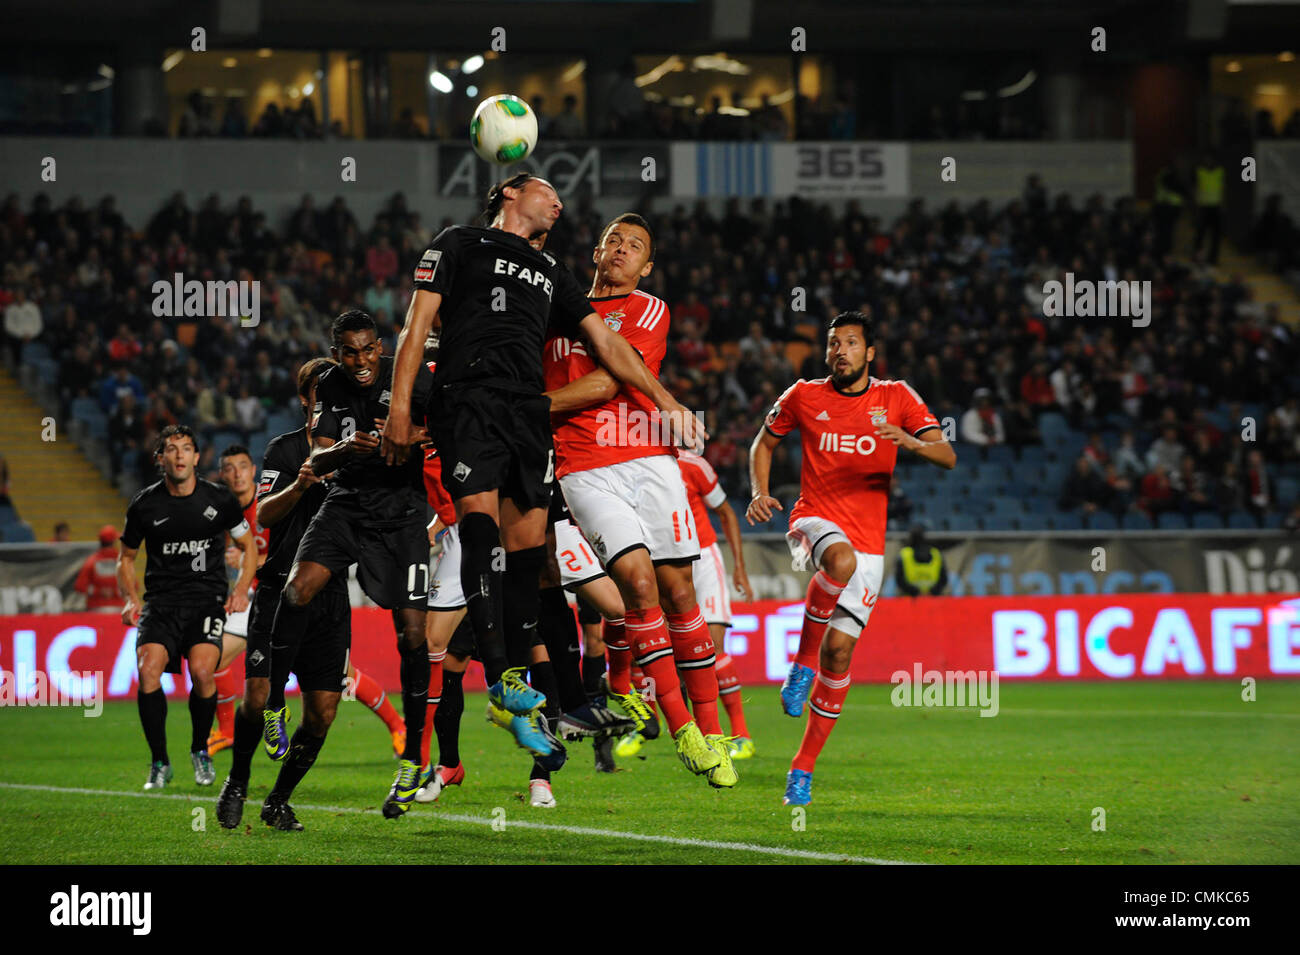 Academica defender Fernando vies for the ball with Benfica's striker Lima during the portuguese Liga Sagres football match between Academica and Benfica Stock Photo